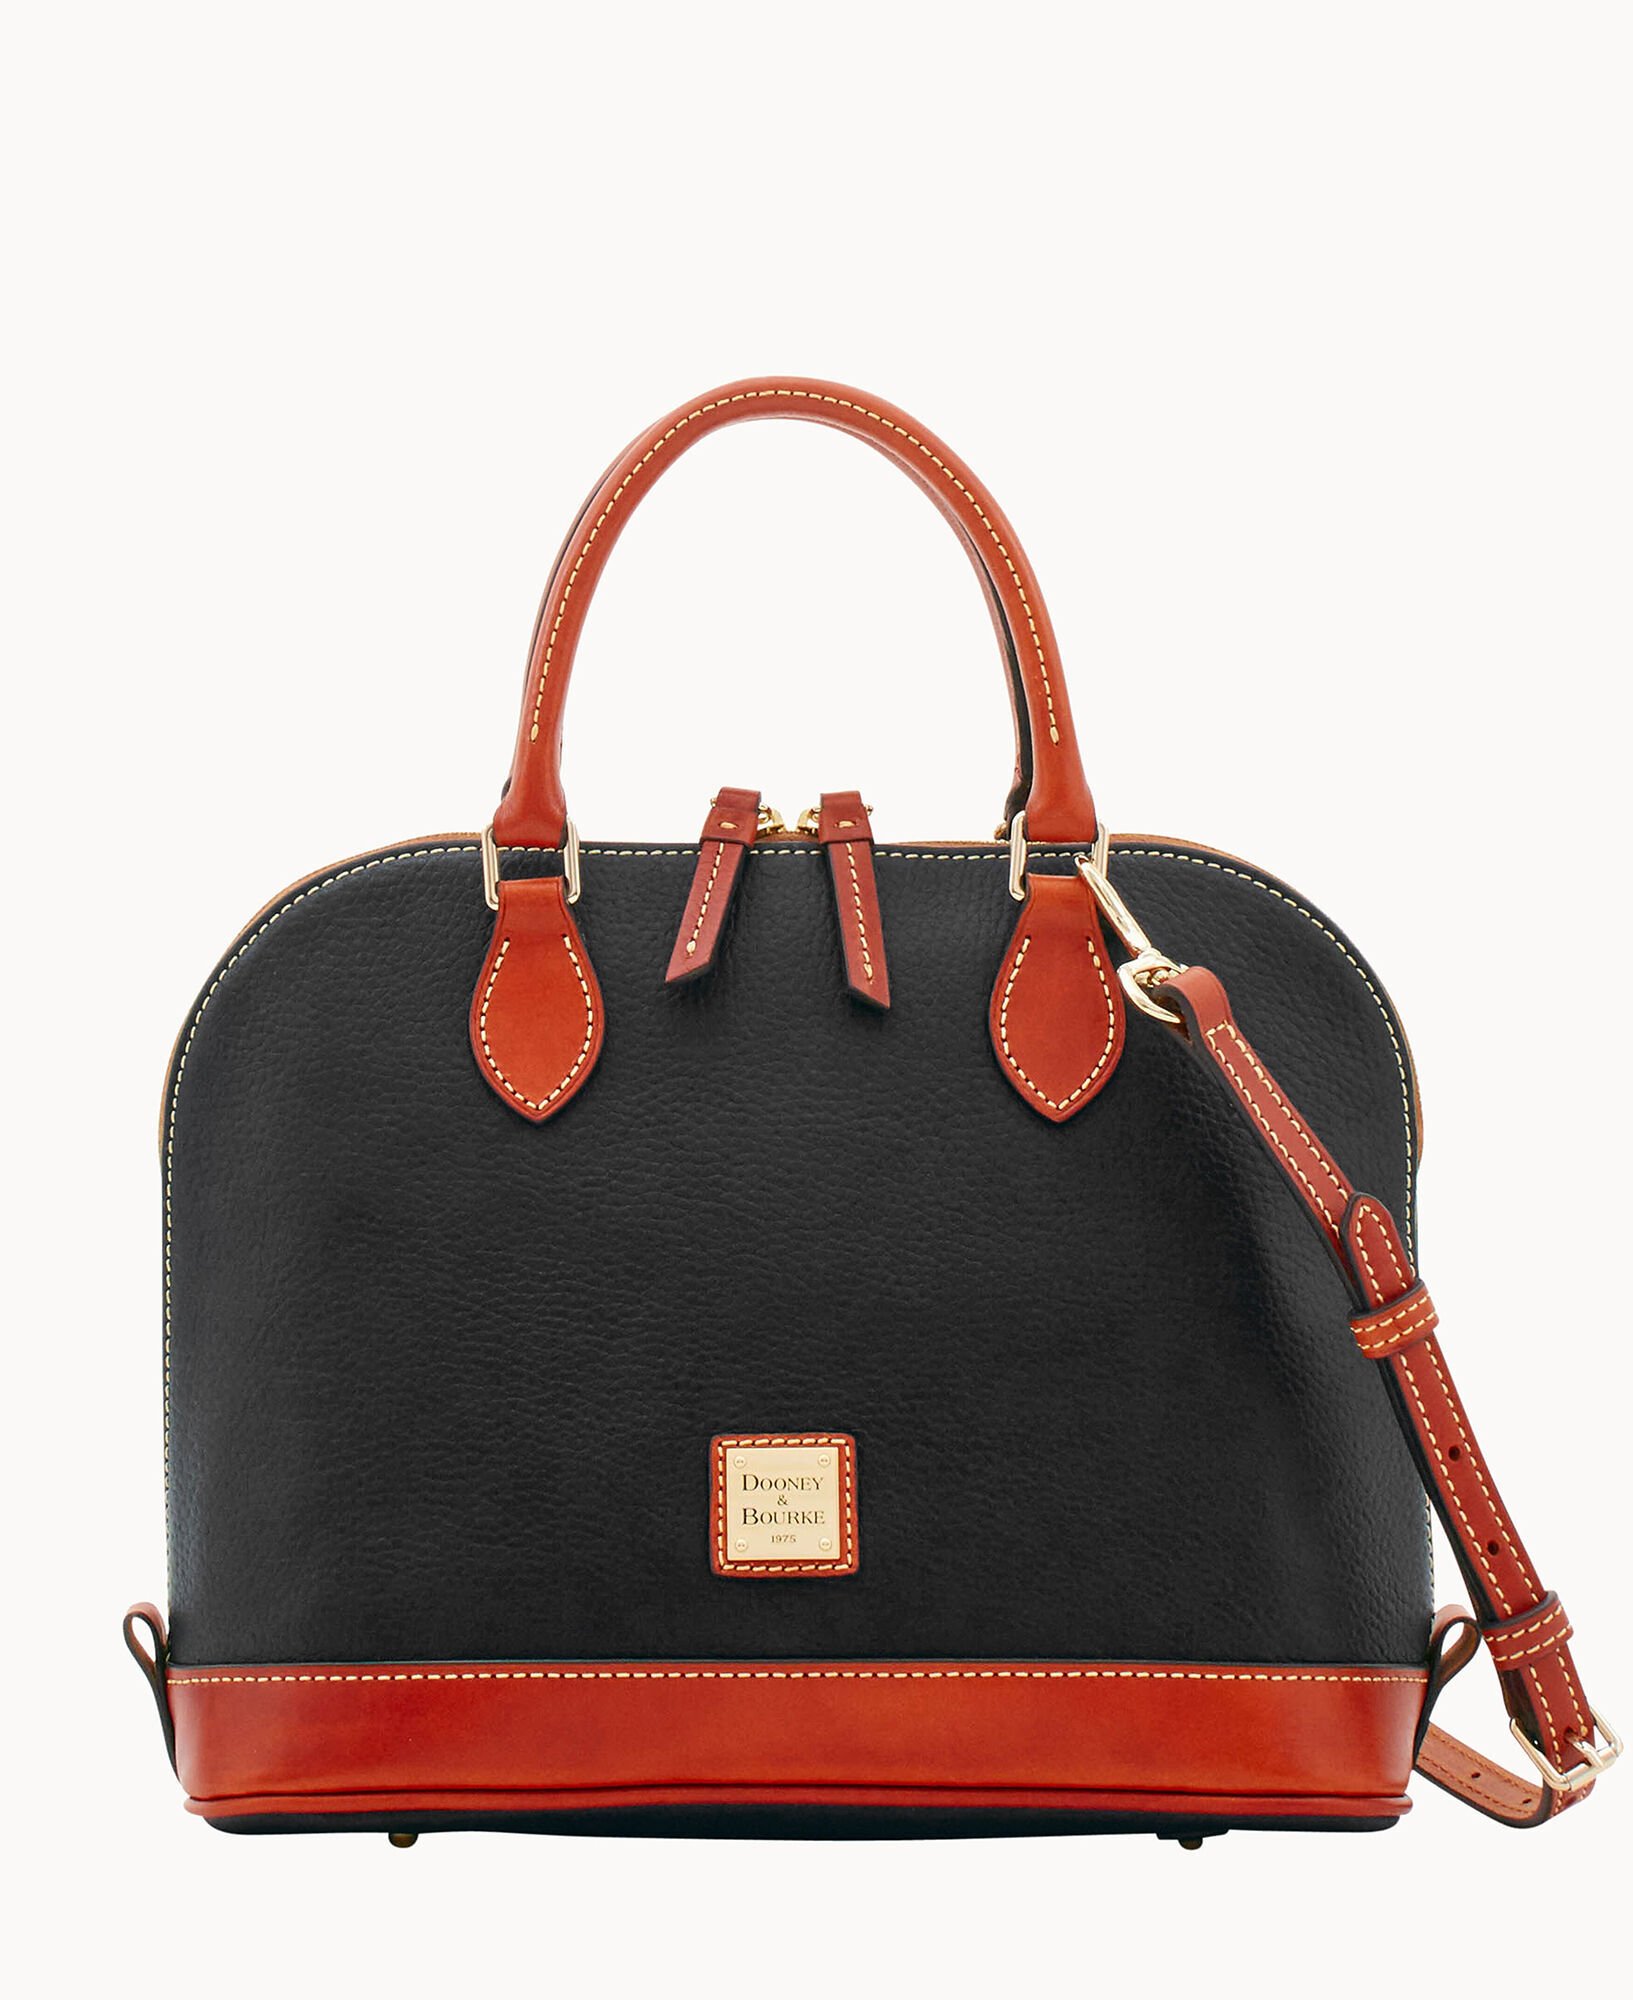 Dooney and Bourke leather satchel with top handle